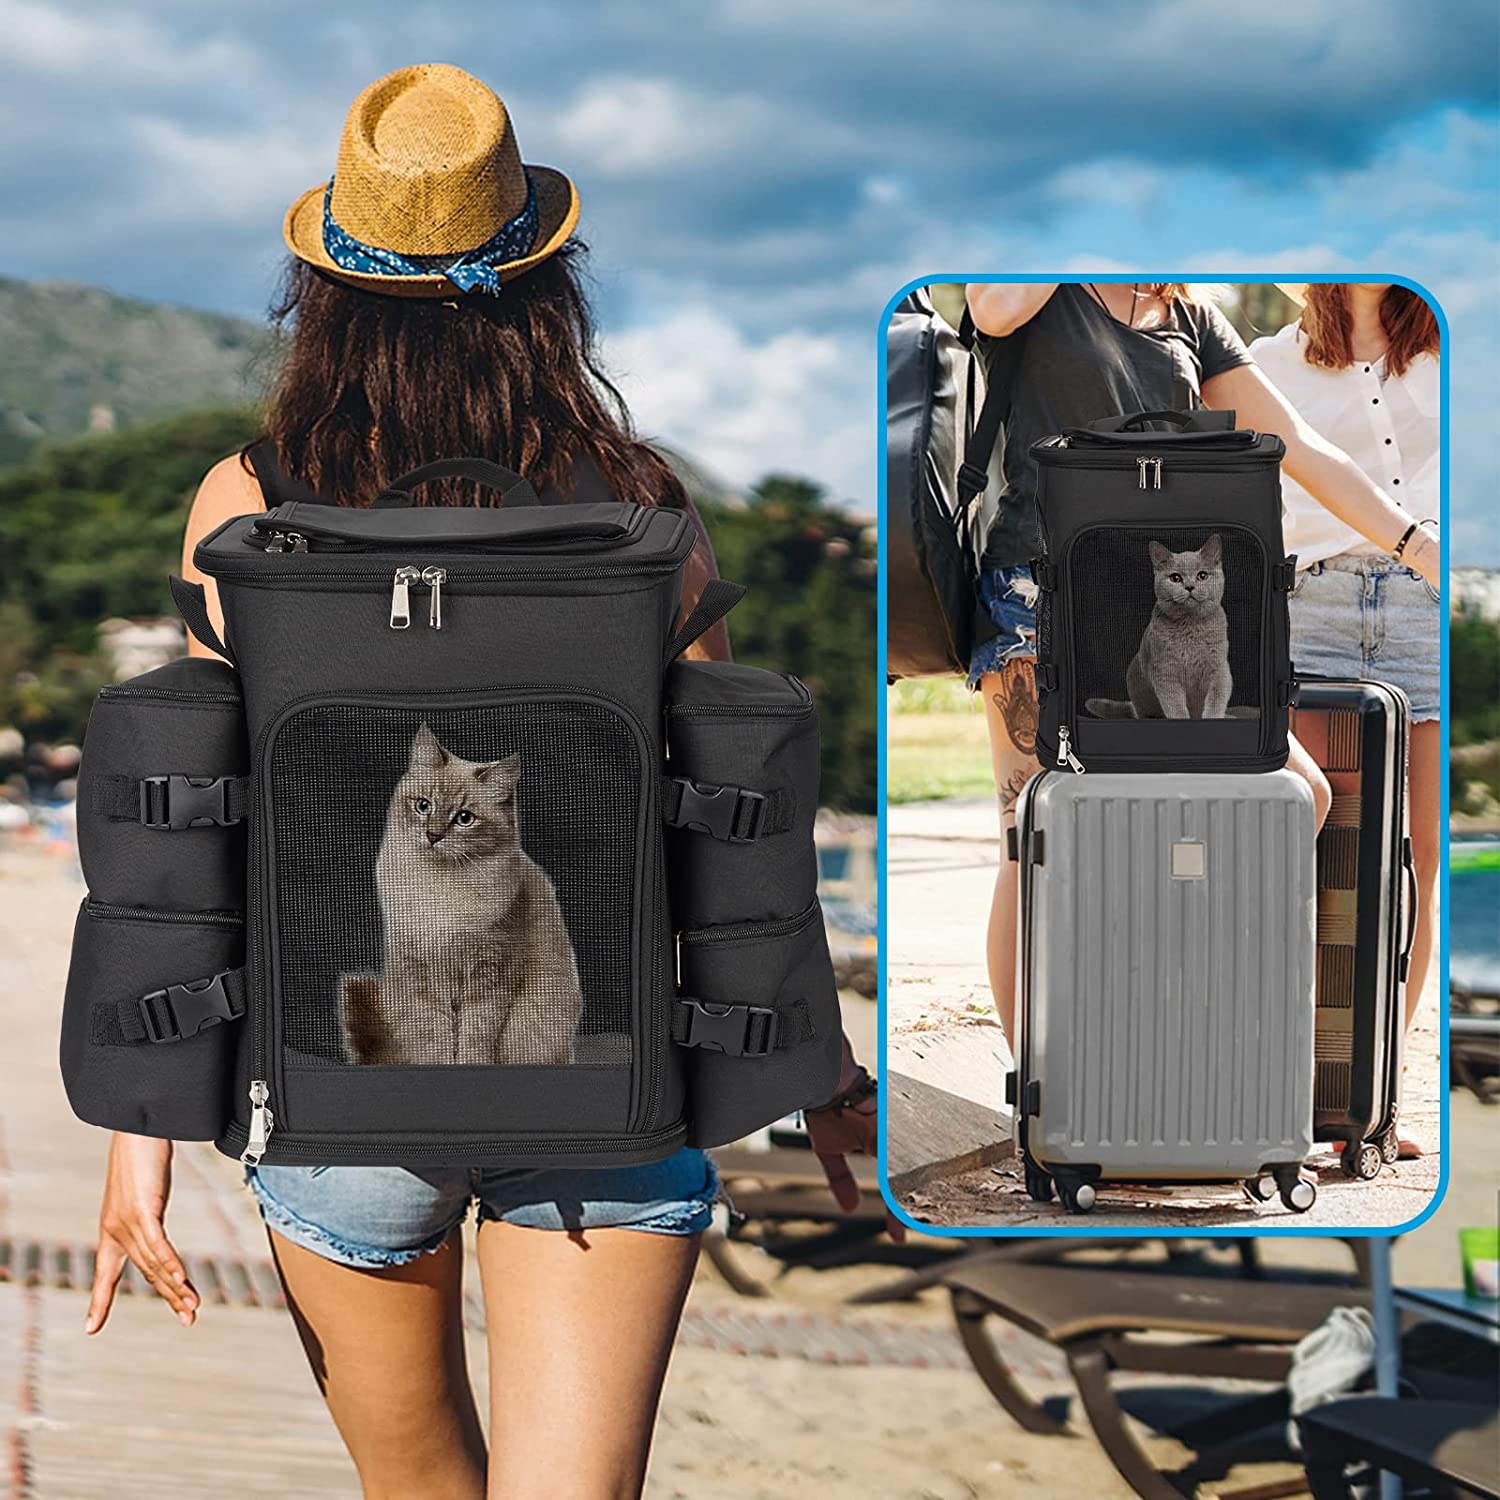 Pet Carrier Backpack with Detachable Side Pockets for Cats and Dogs, Expandable Cat Dog Puppy Carrier Backpacks, Airline Approved, for Travel / Hiking / Outdoor Use, Black